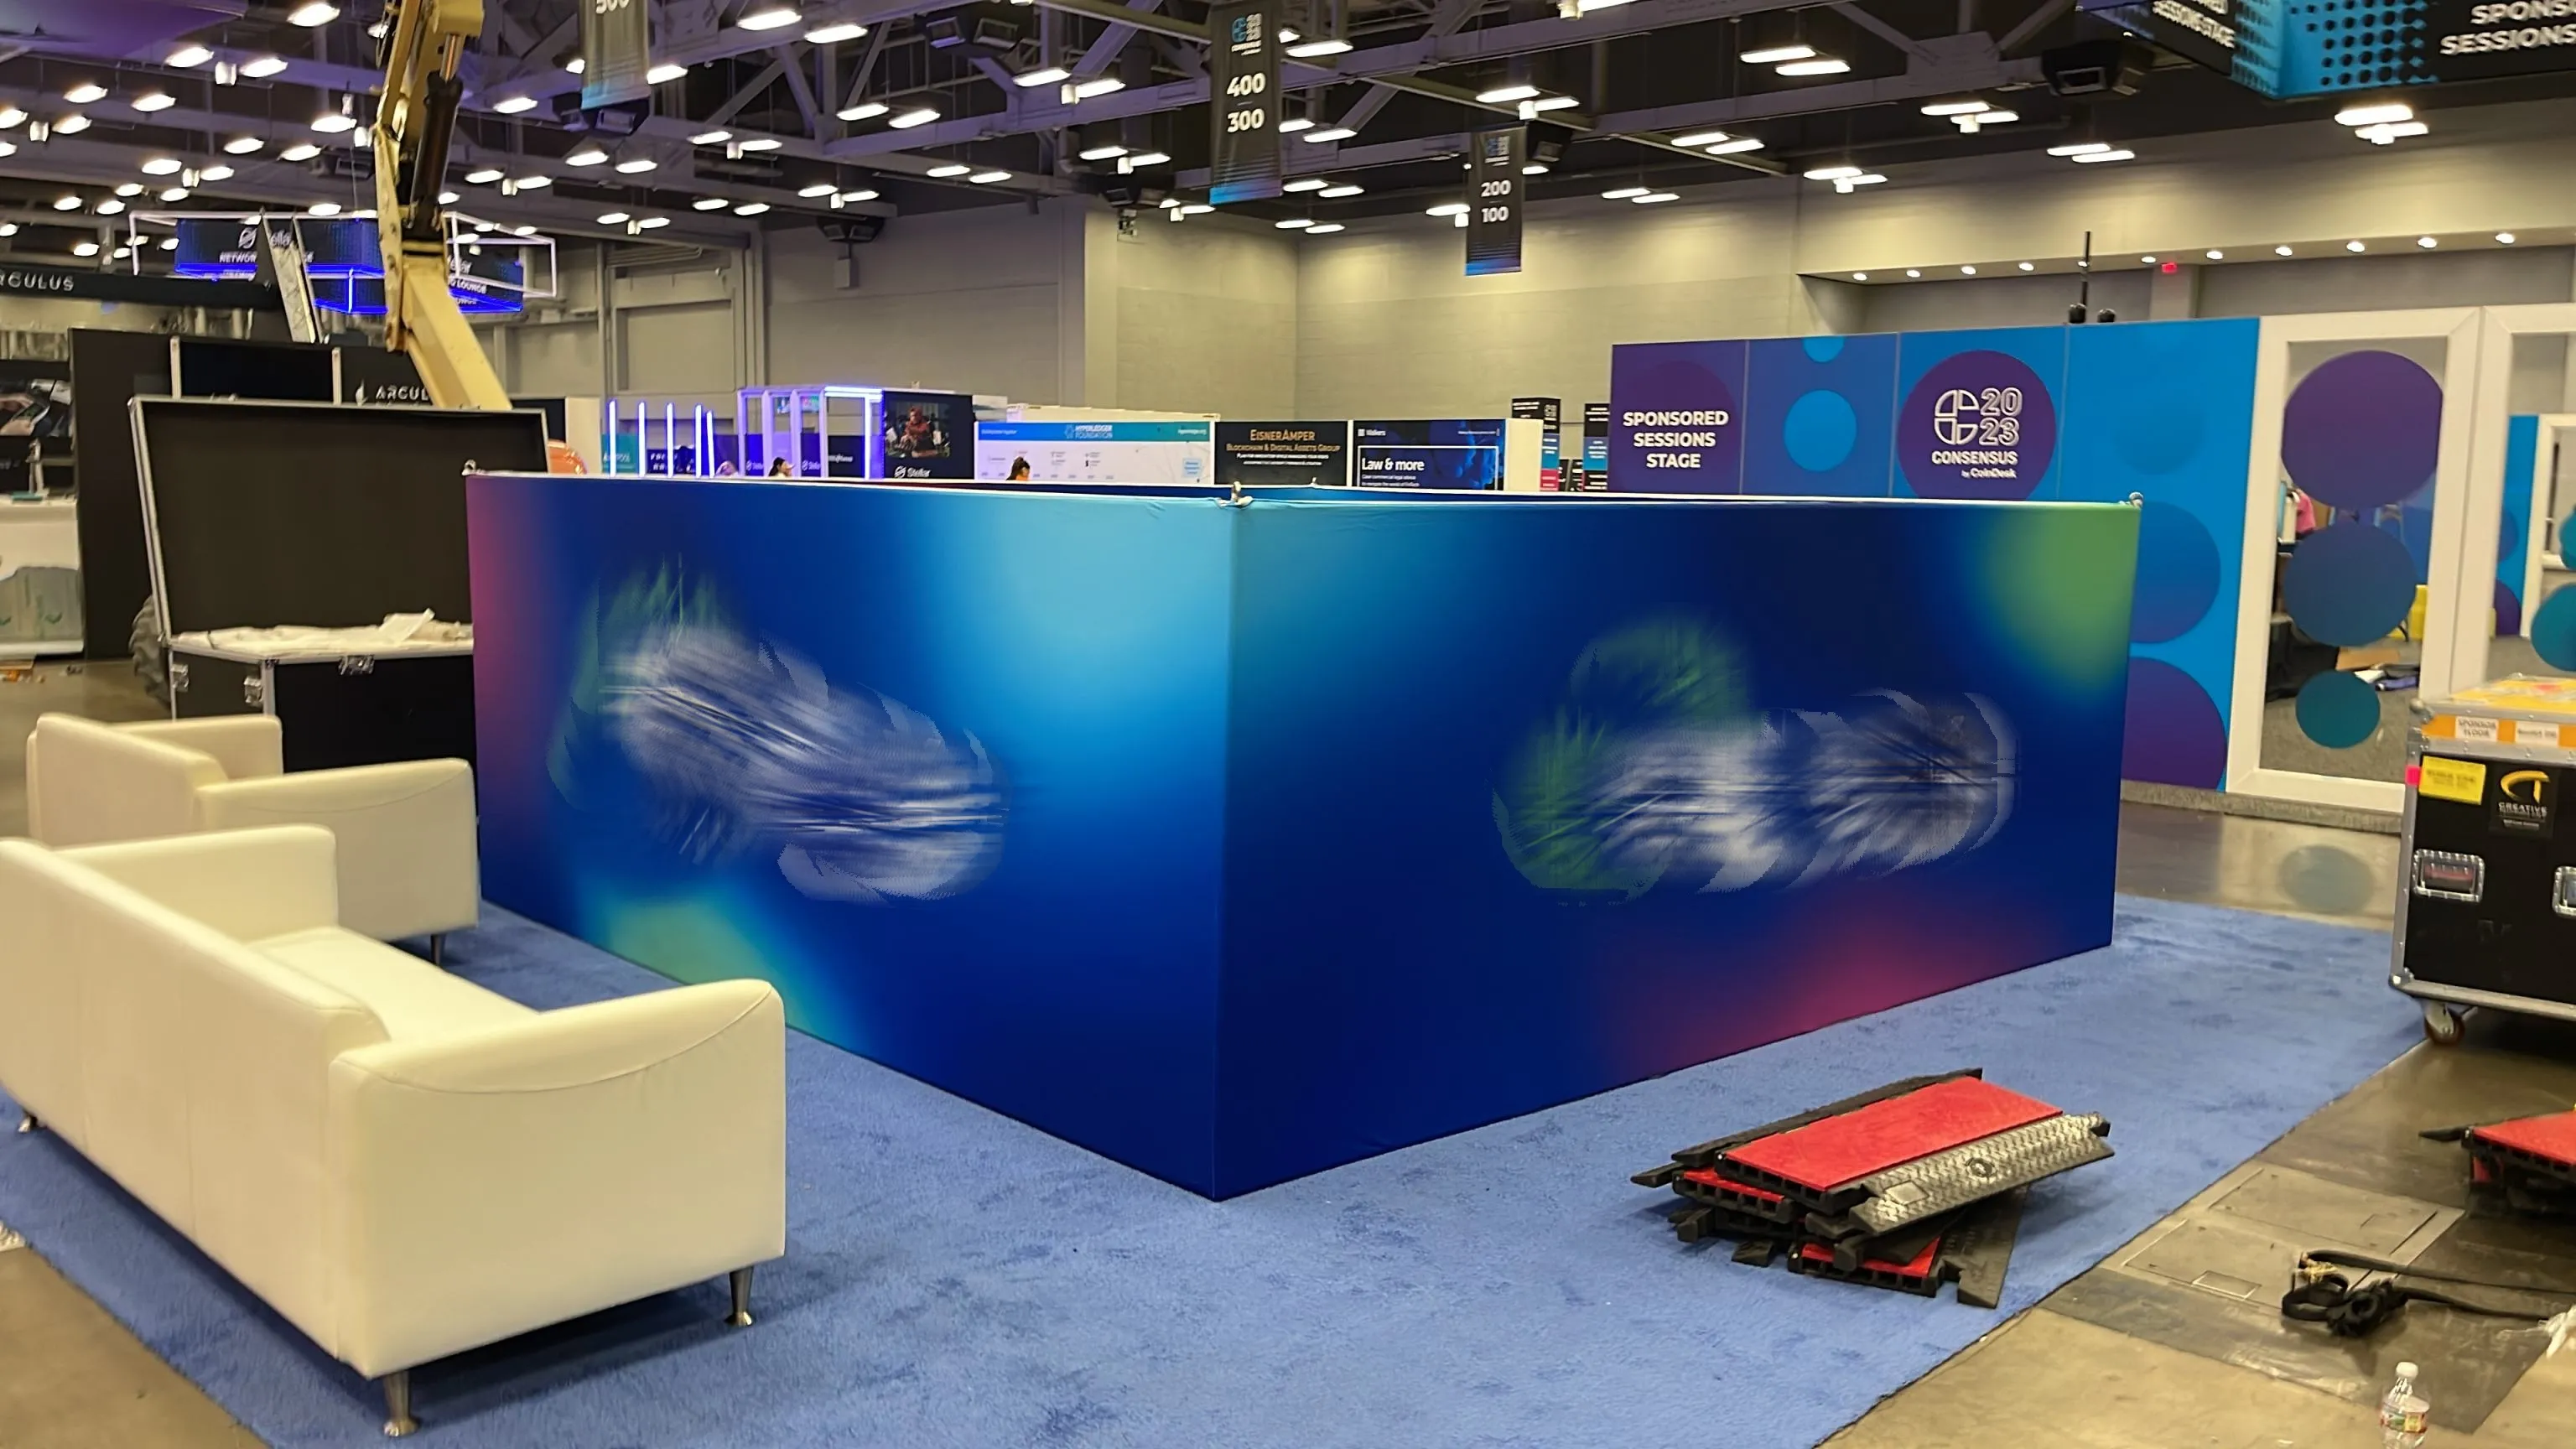 Modular Trade Show Exhibition Frameless Booth Design with LED Light Box Backlit In AHR Expo